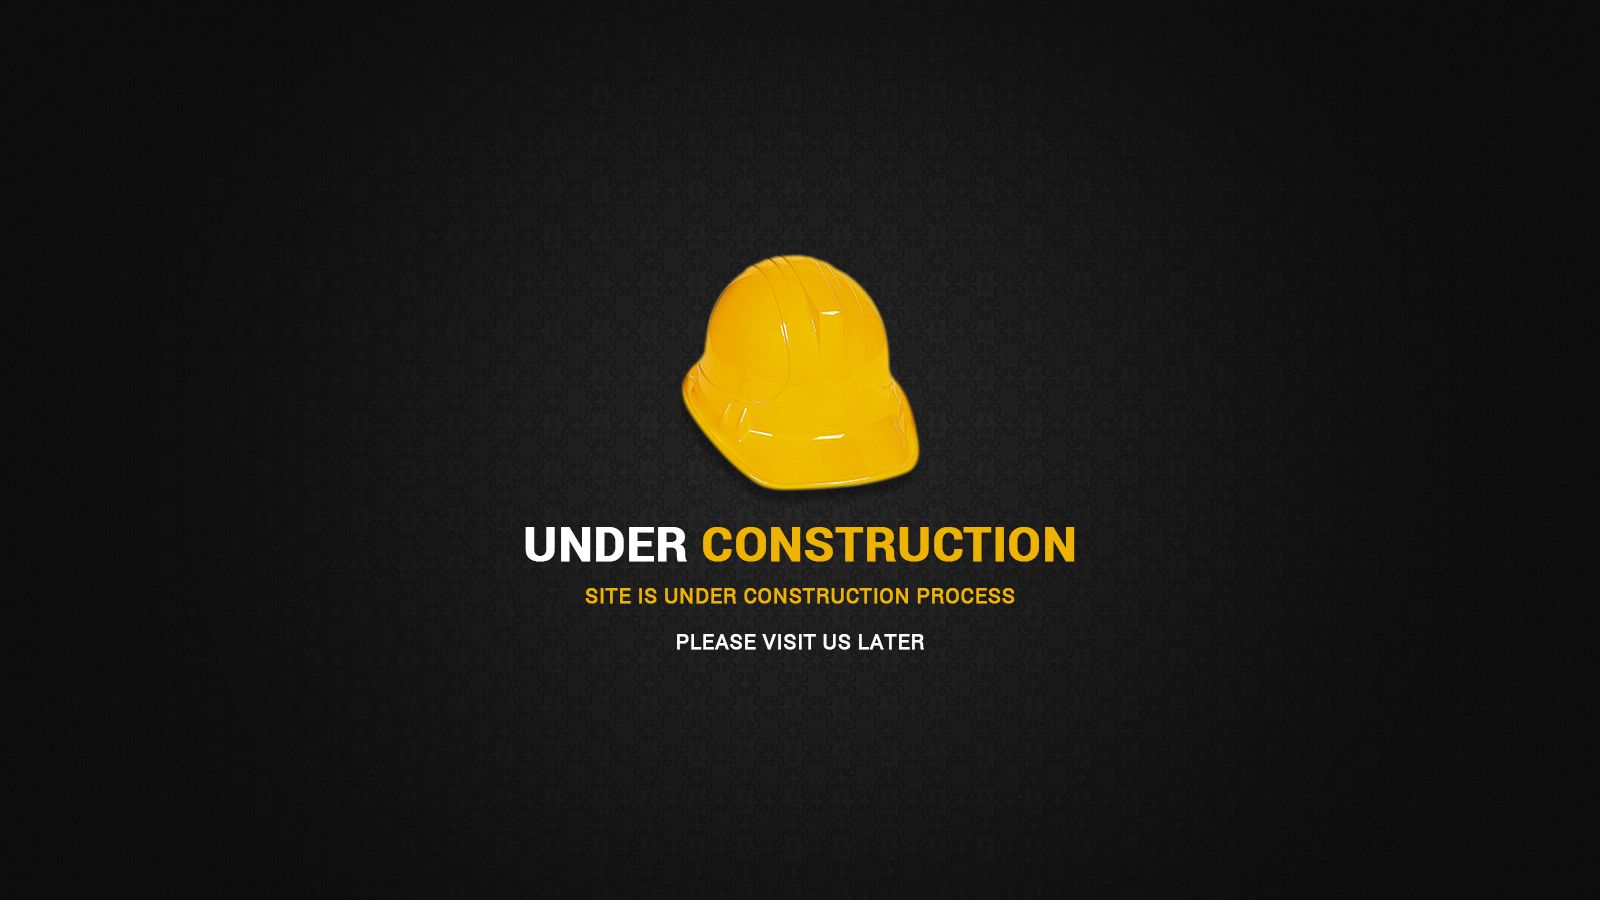 Page Under Construction Wallpaper. Larry Page Wallpaper, Homepage Nexus Wallpaper and Bing Homepage Wallpaper